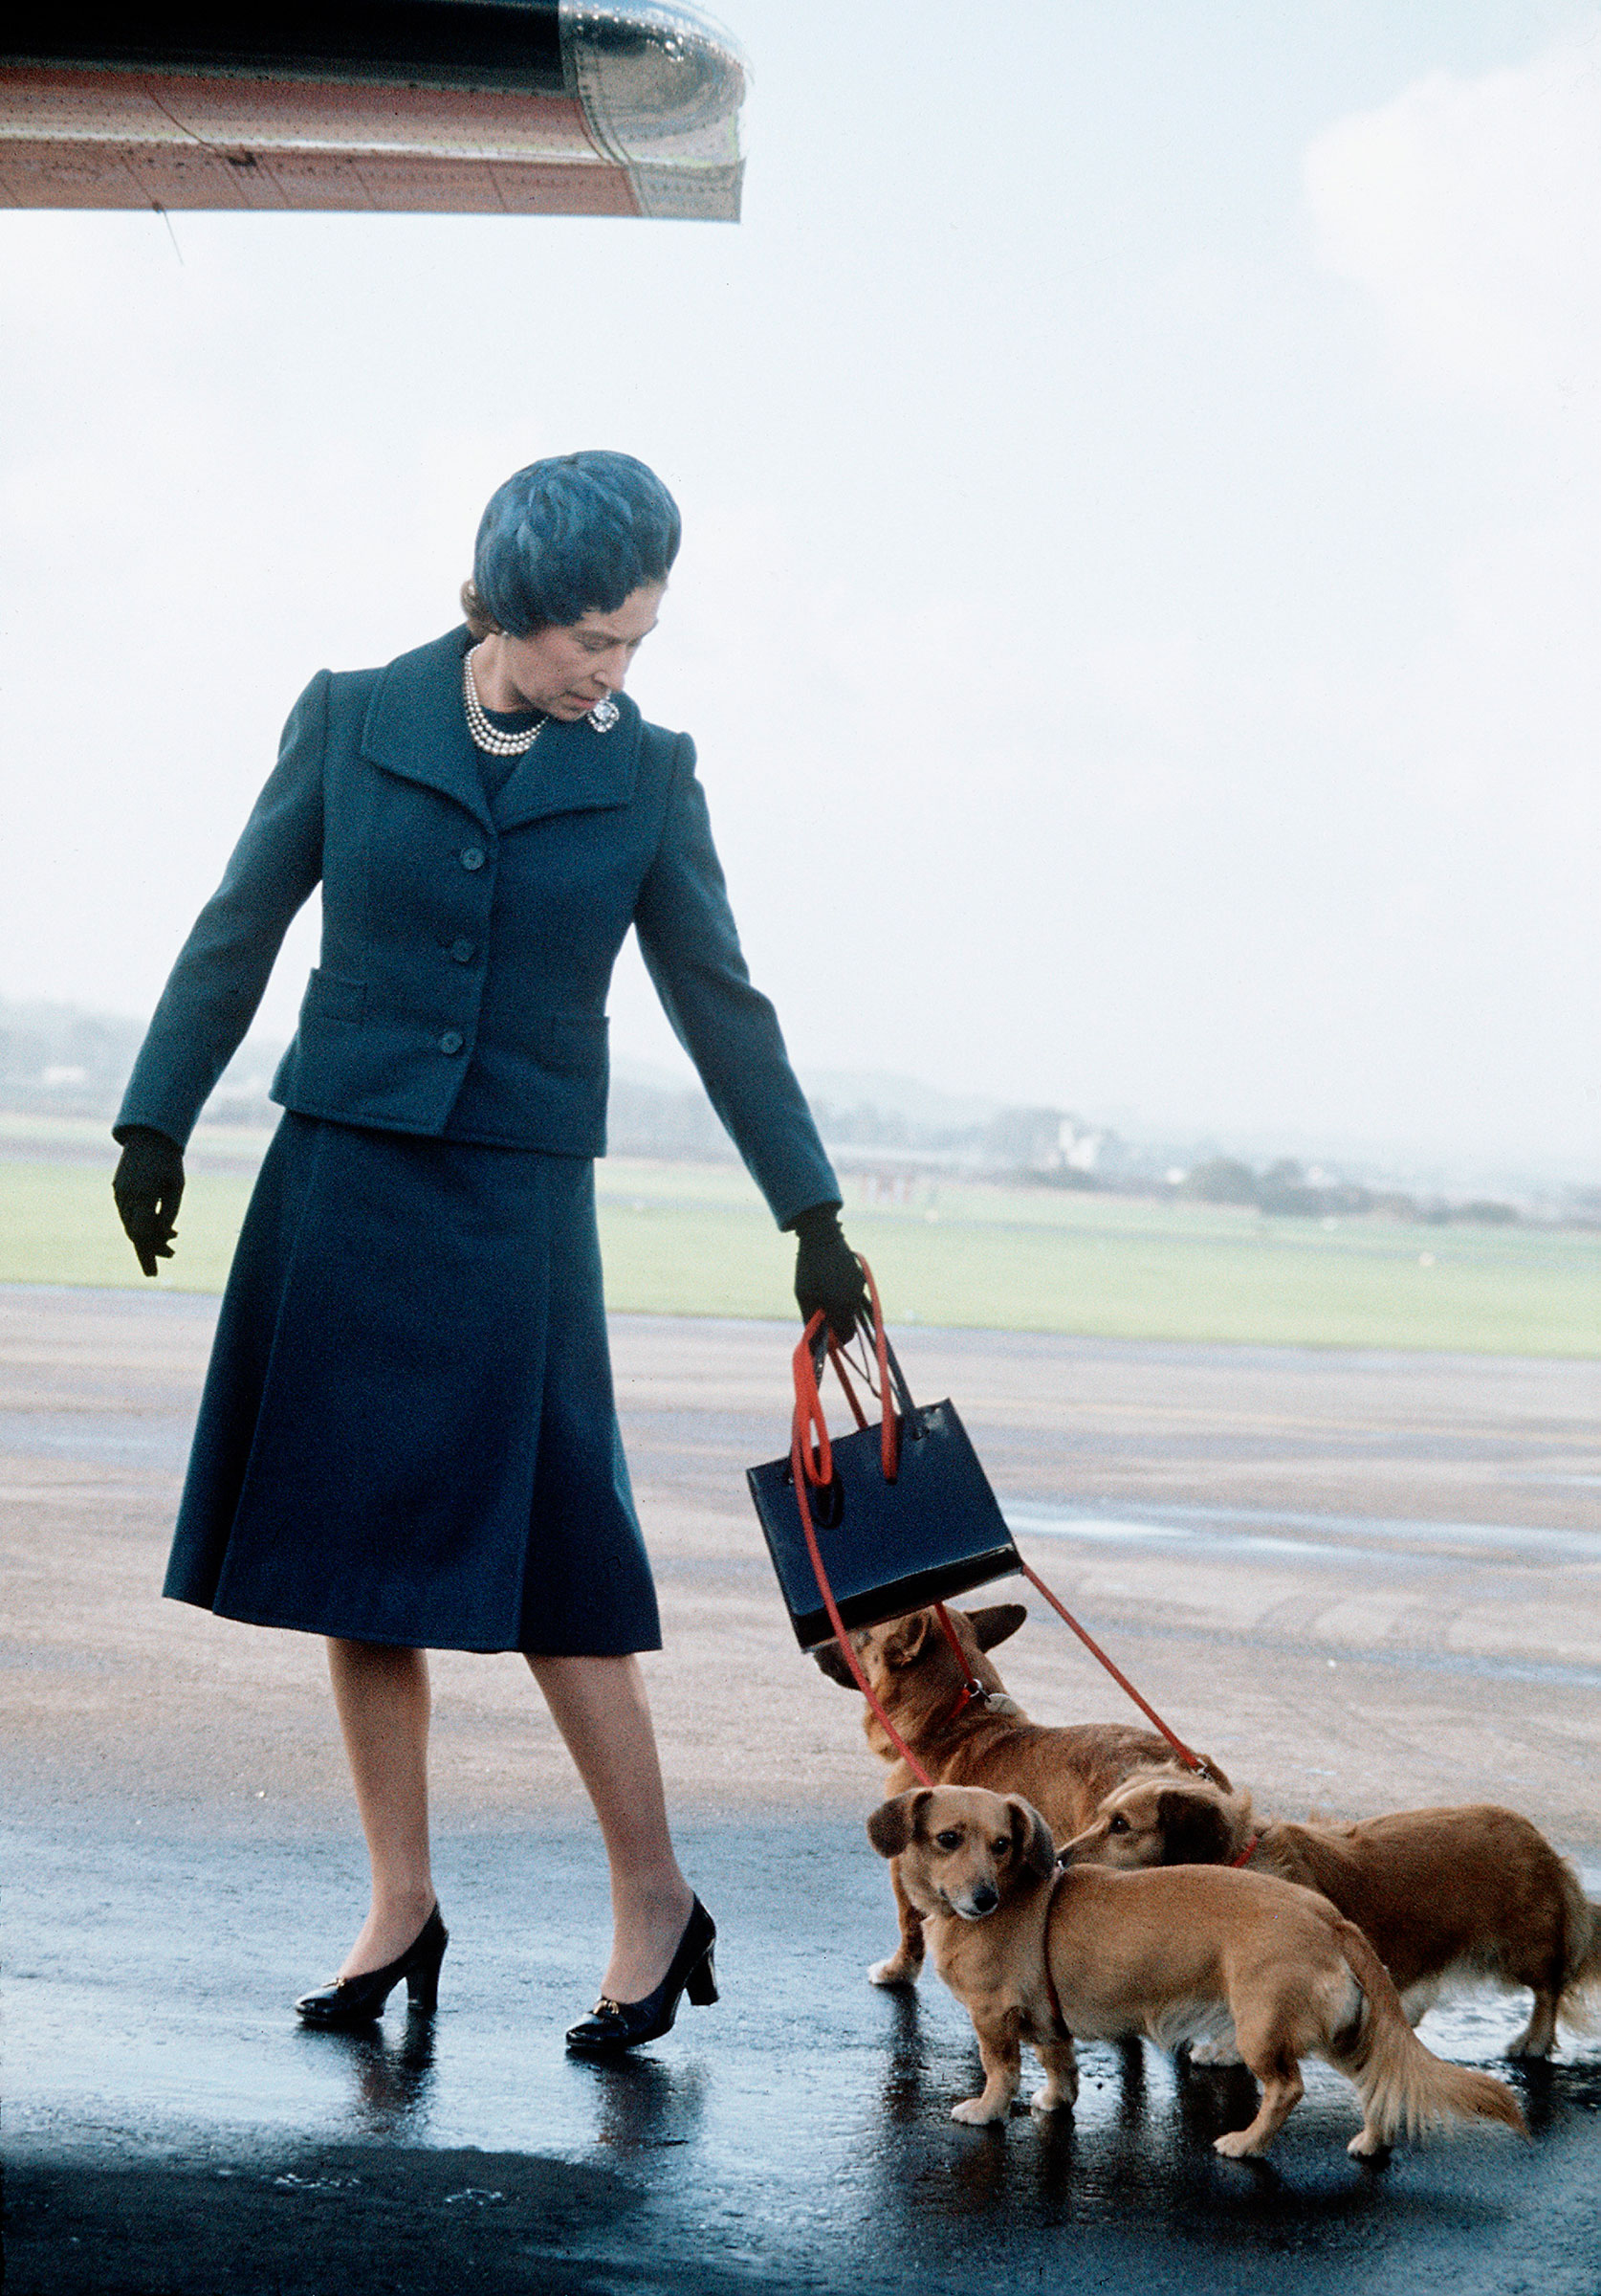 Queen Elizabeth ll arrives at Aberdeen Airport with her corgis to start her holidays in Balmoral, Scotland in 1974. (Anwar Hussein—Getty Images)